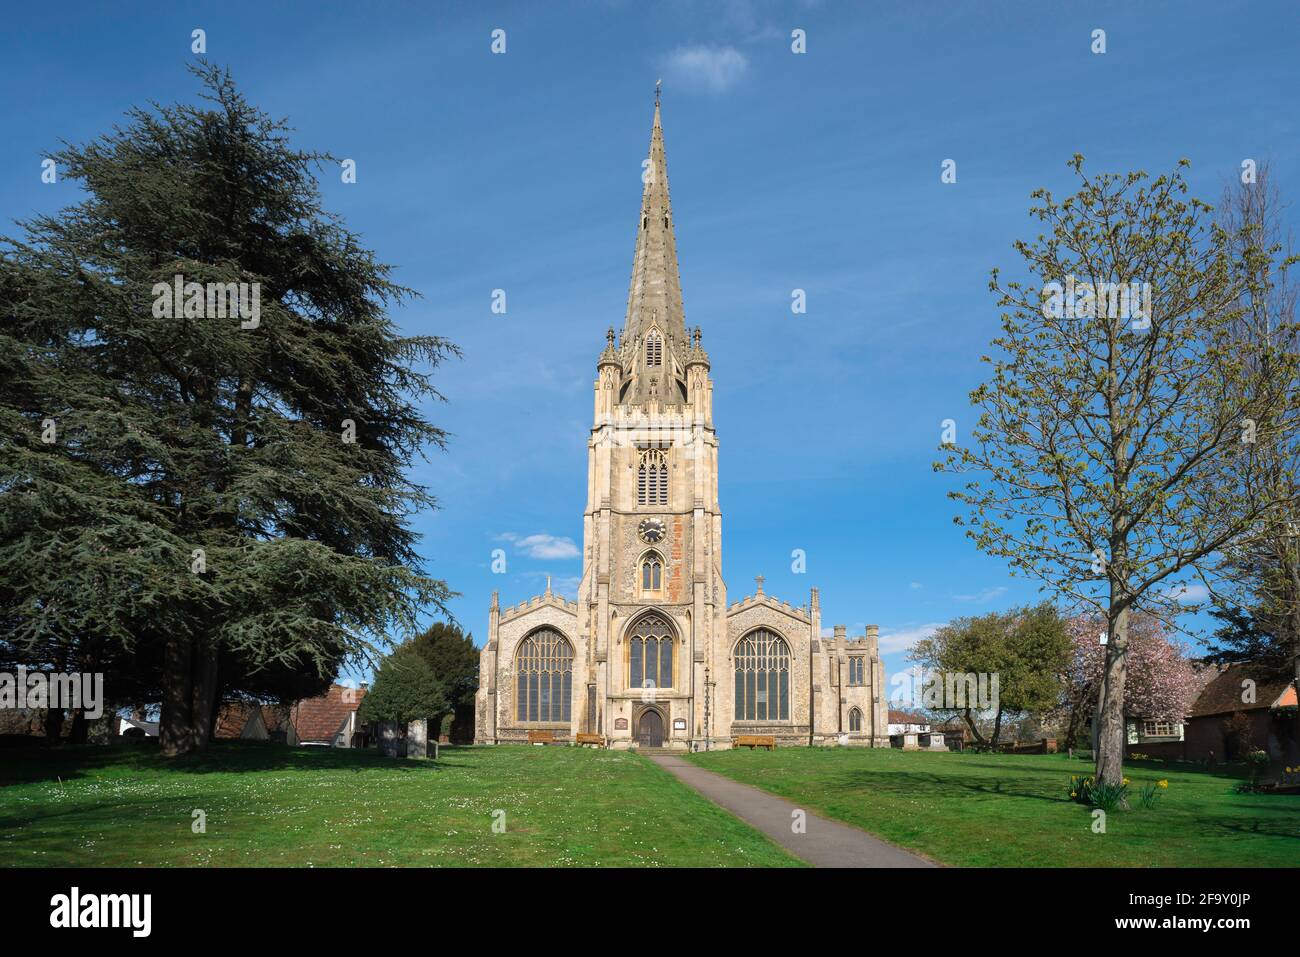 Saffron Walden church, view of the west tower and spire of St Mary The Virgin parish church in the centre of Saffron Walden, Essex, England, UK Stock Photo